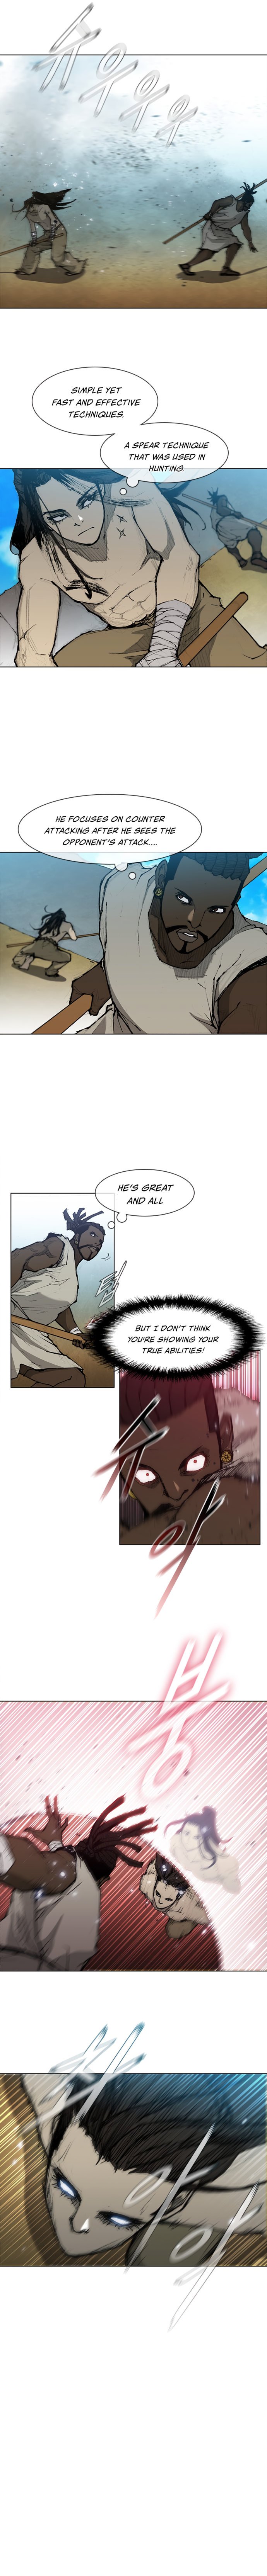 long-way-of-the-warrior-chap-31-4